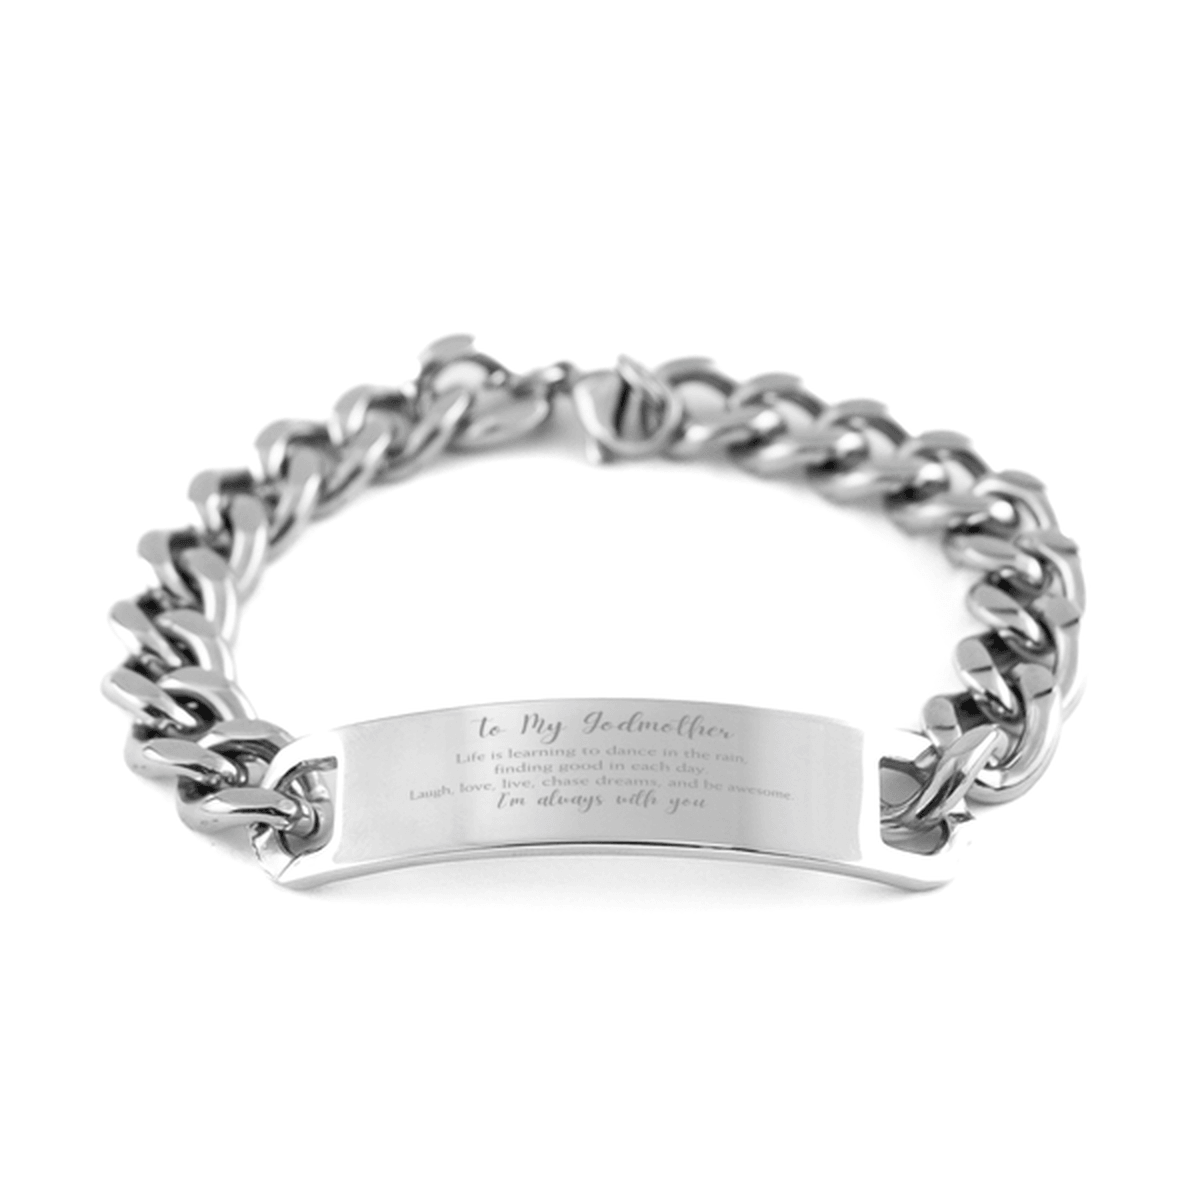 Godmother Engraved Cuban Chain Stainless Steel Bracelet Motivational Birthday Christmas Mother's day Gifts Life is learning to dance in the rain, finding good in each day. I'm always with you - Mallard Moon Gift Shop